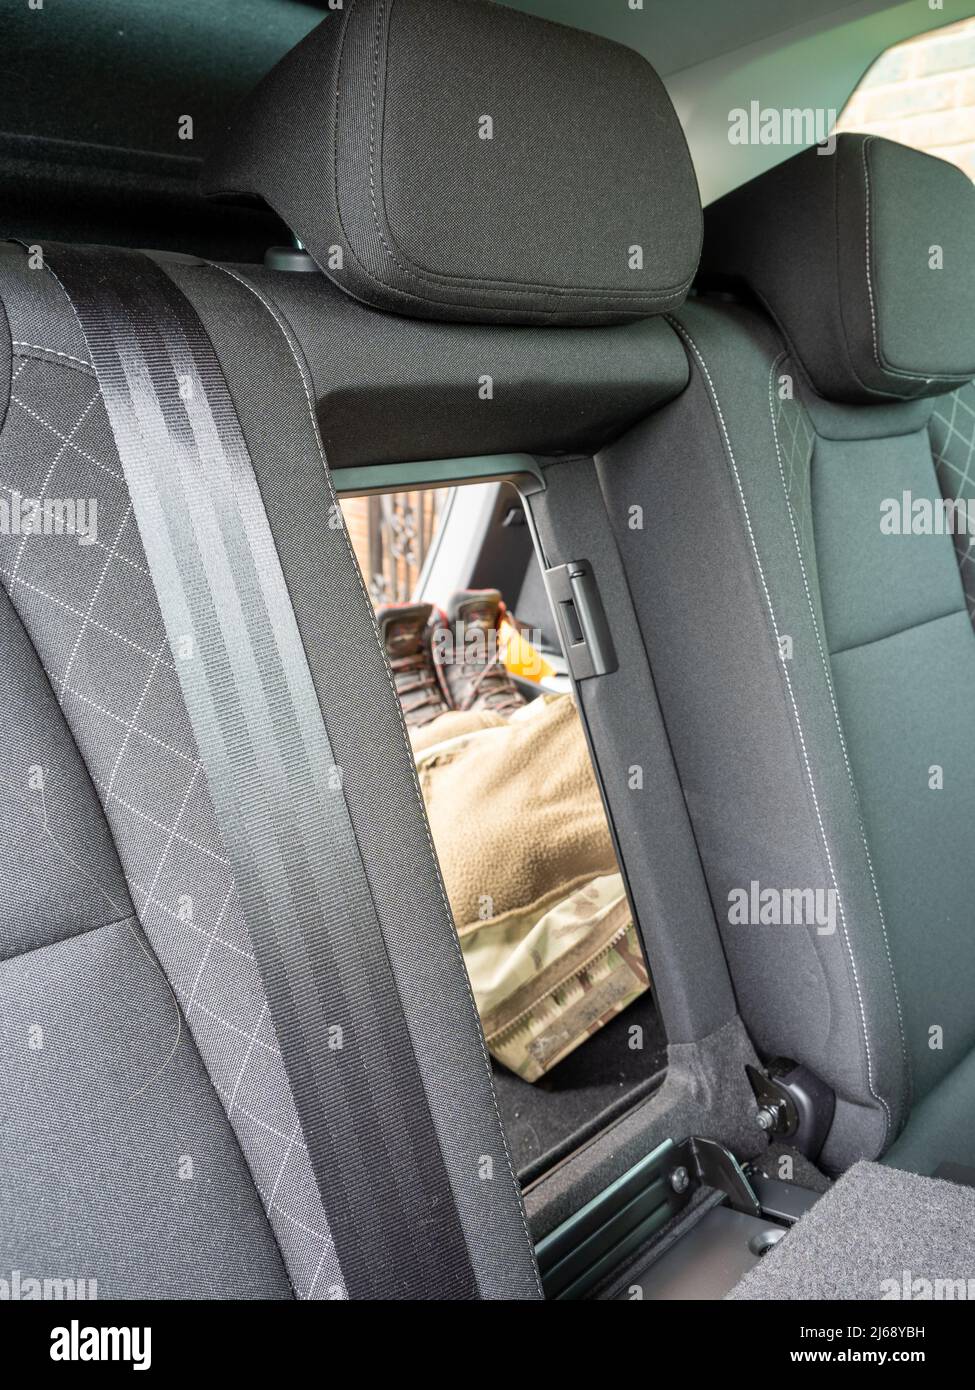 Secret Folding rear car seat hatch to access the trunk boot space Stock Photo